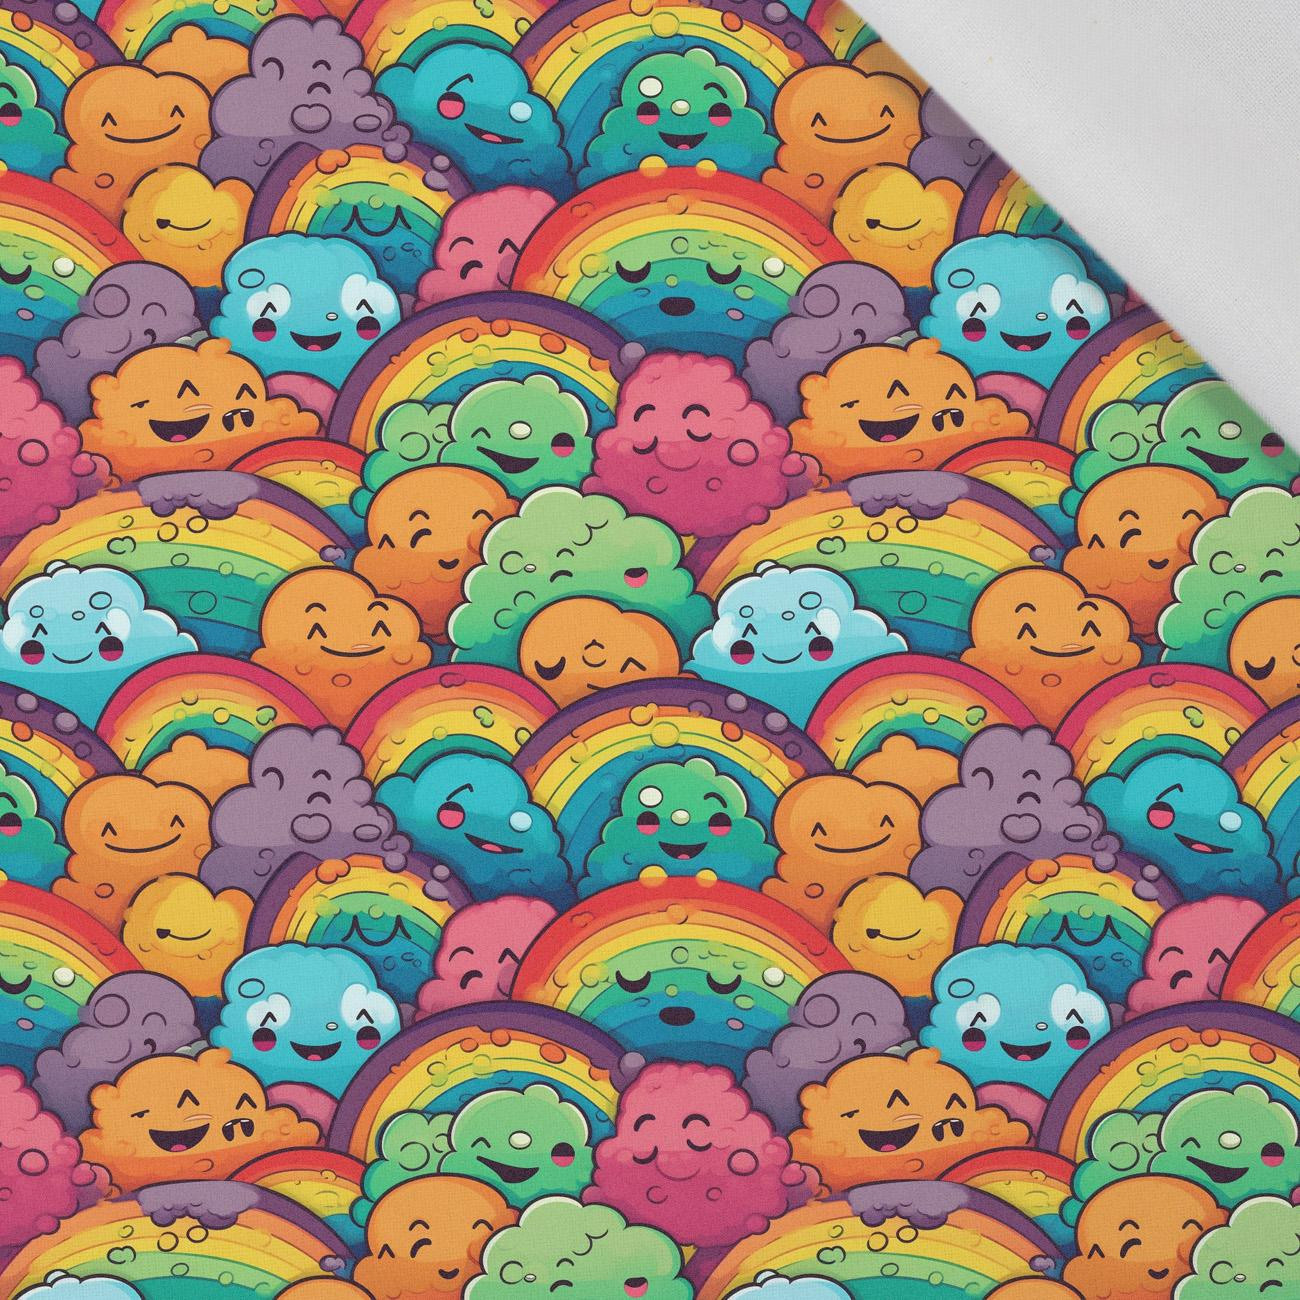 COLORFUL CLOUDS - Cotton woven fabric